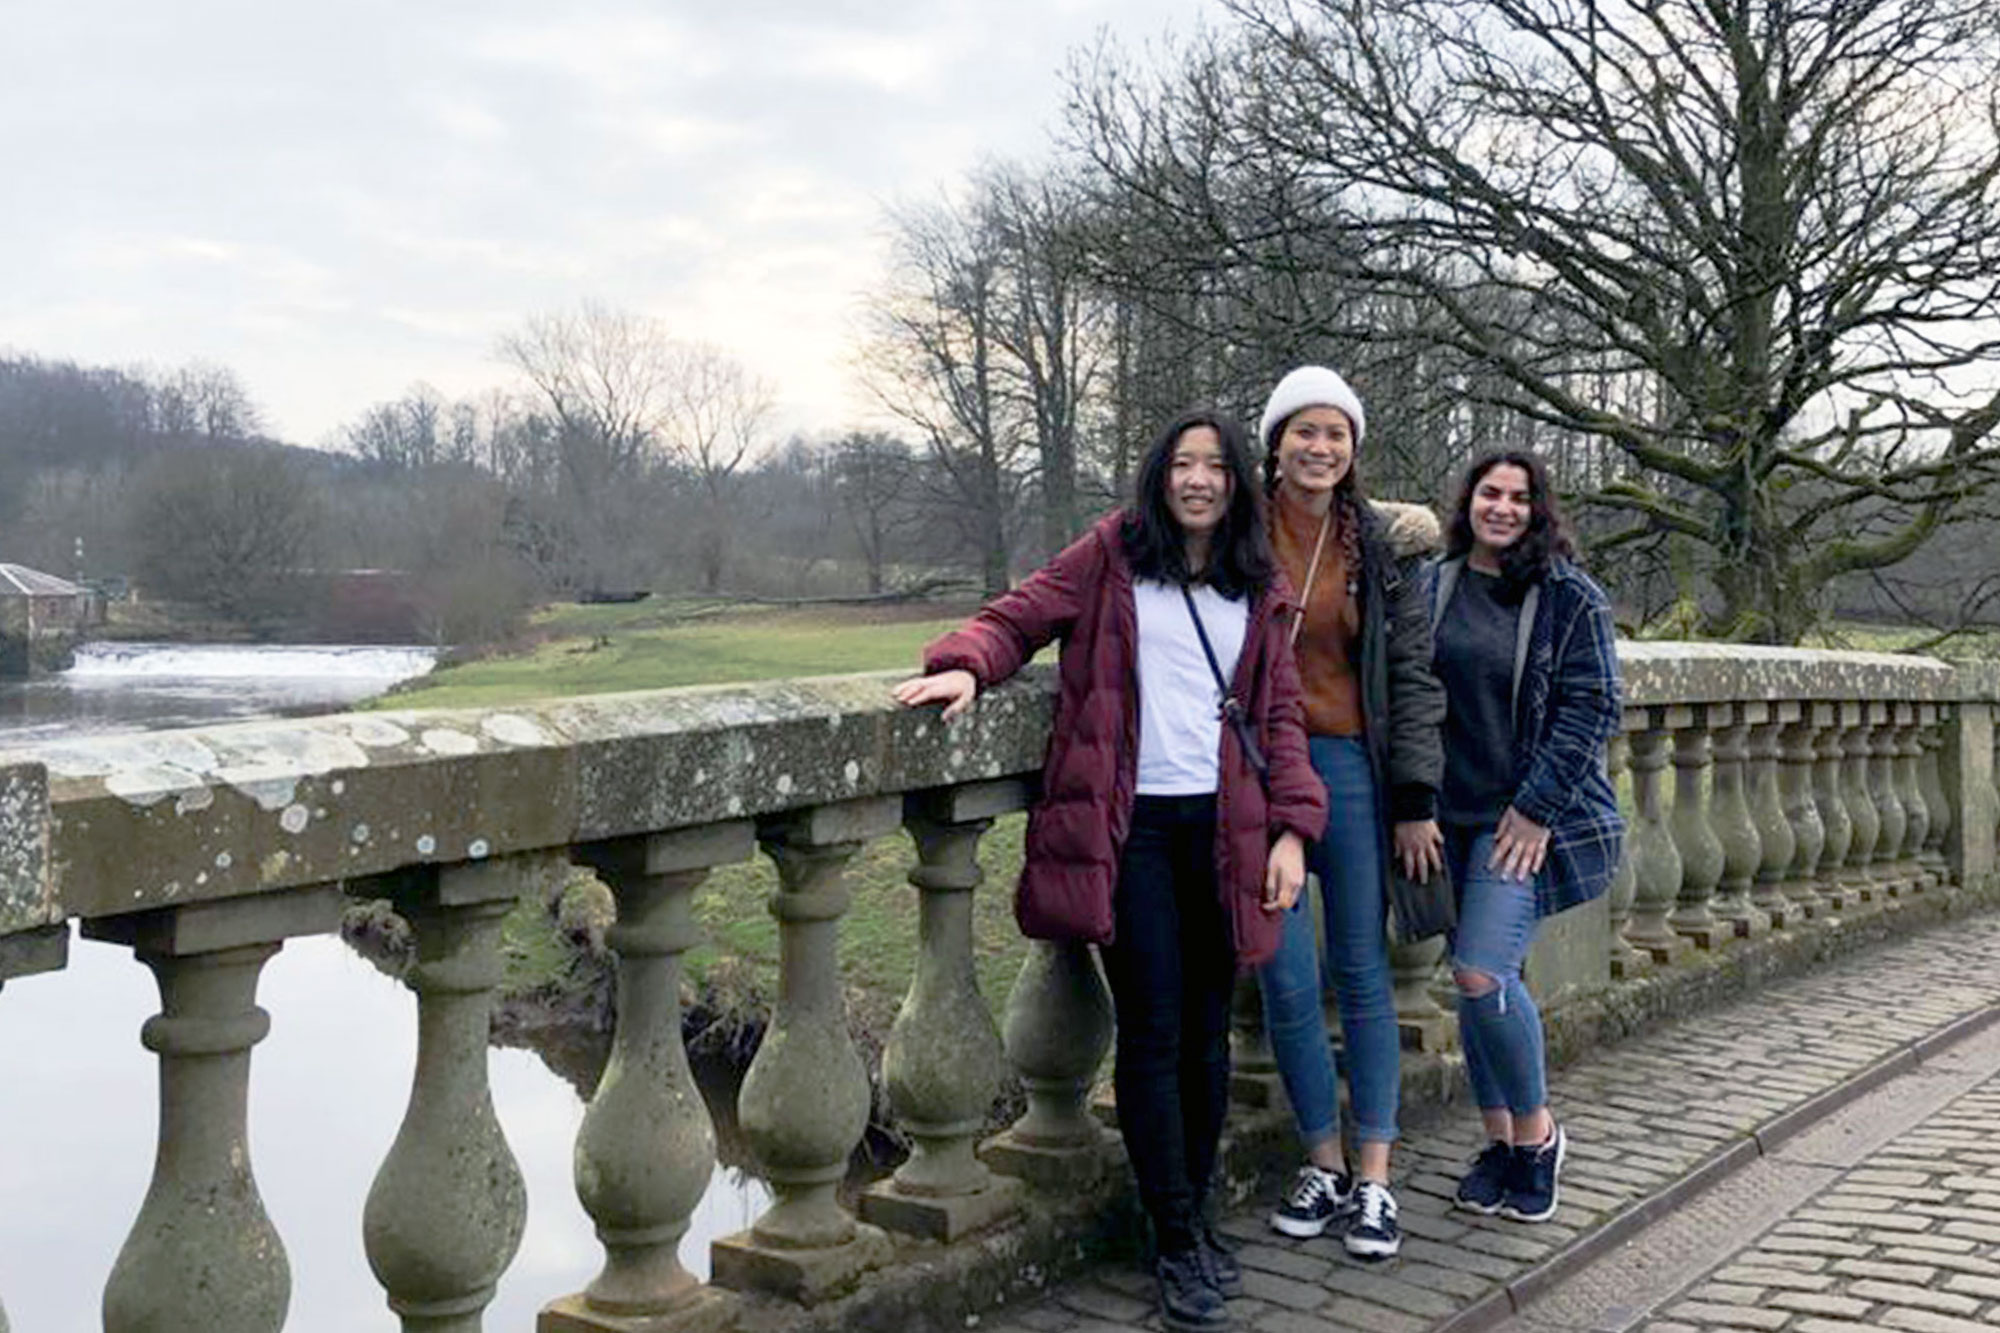 Christine Choy smiling at the camera with two friiends standing on a bridge over a river in parkland, Glasgow